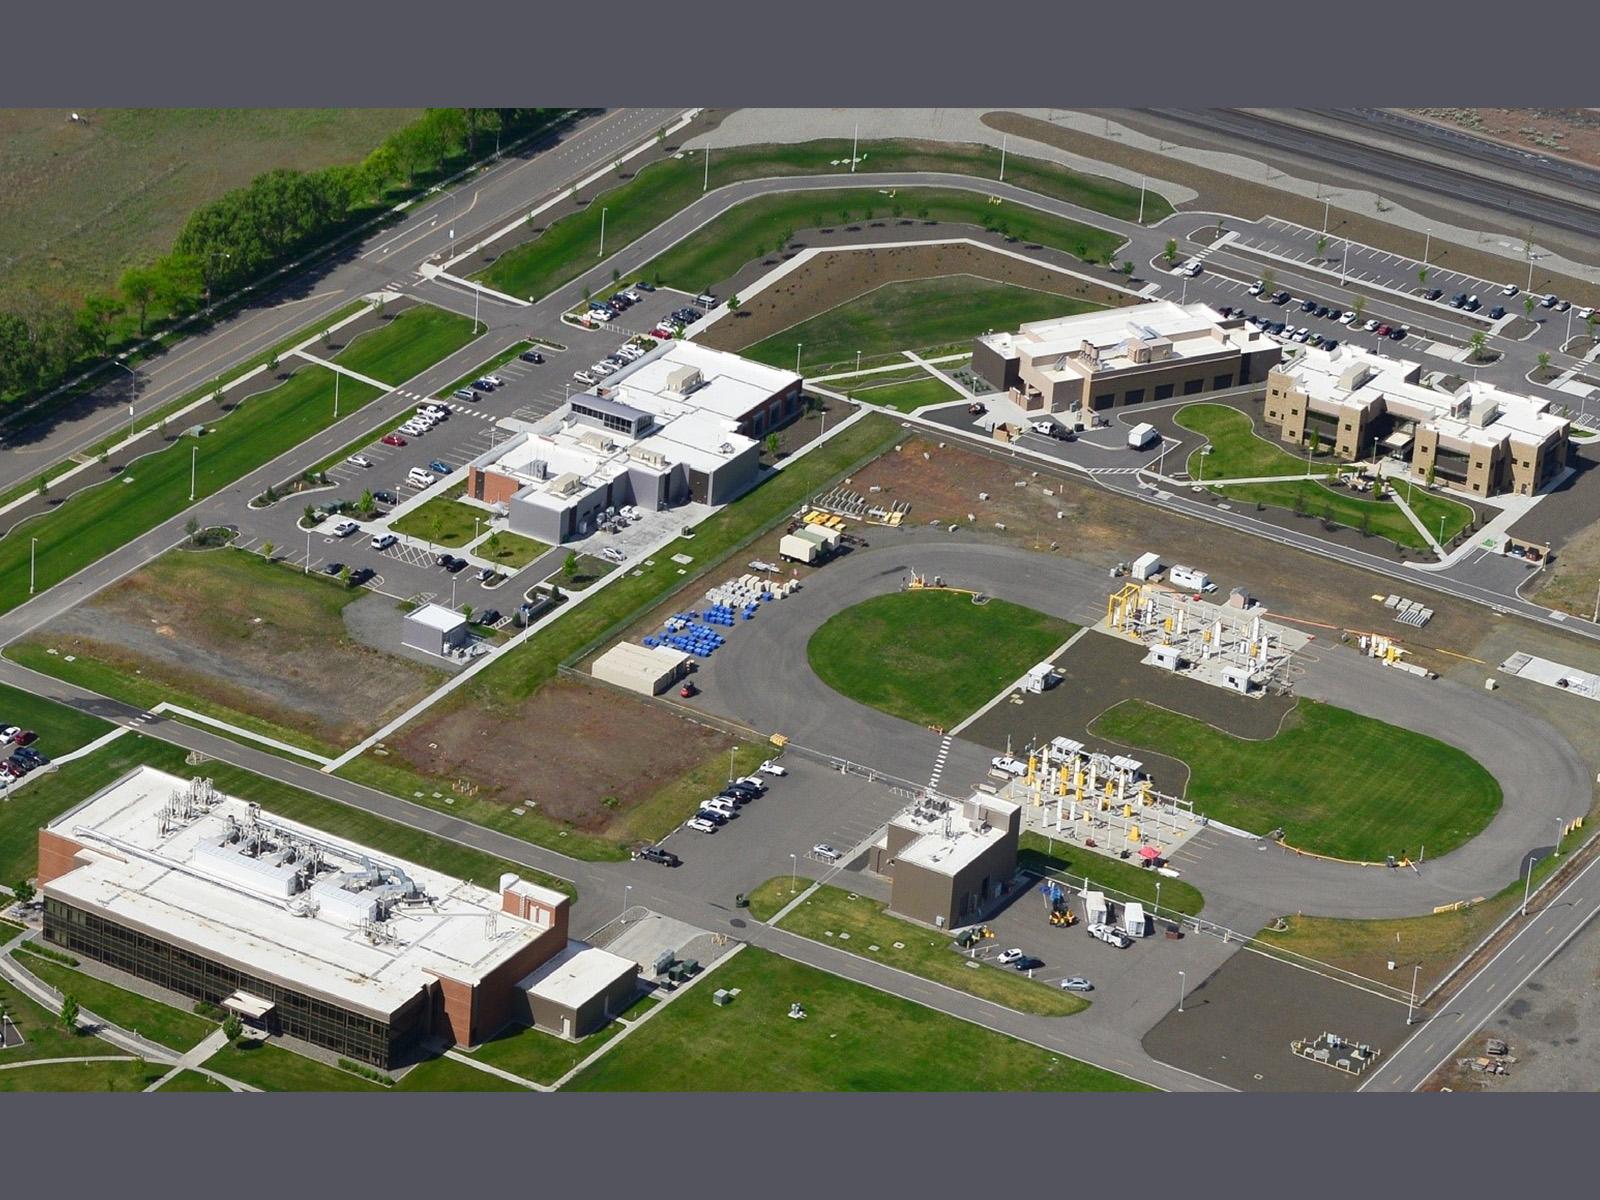 ITIL from an aerial view